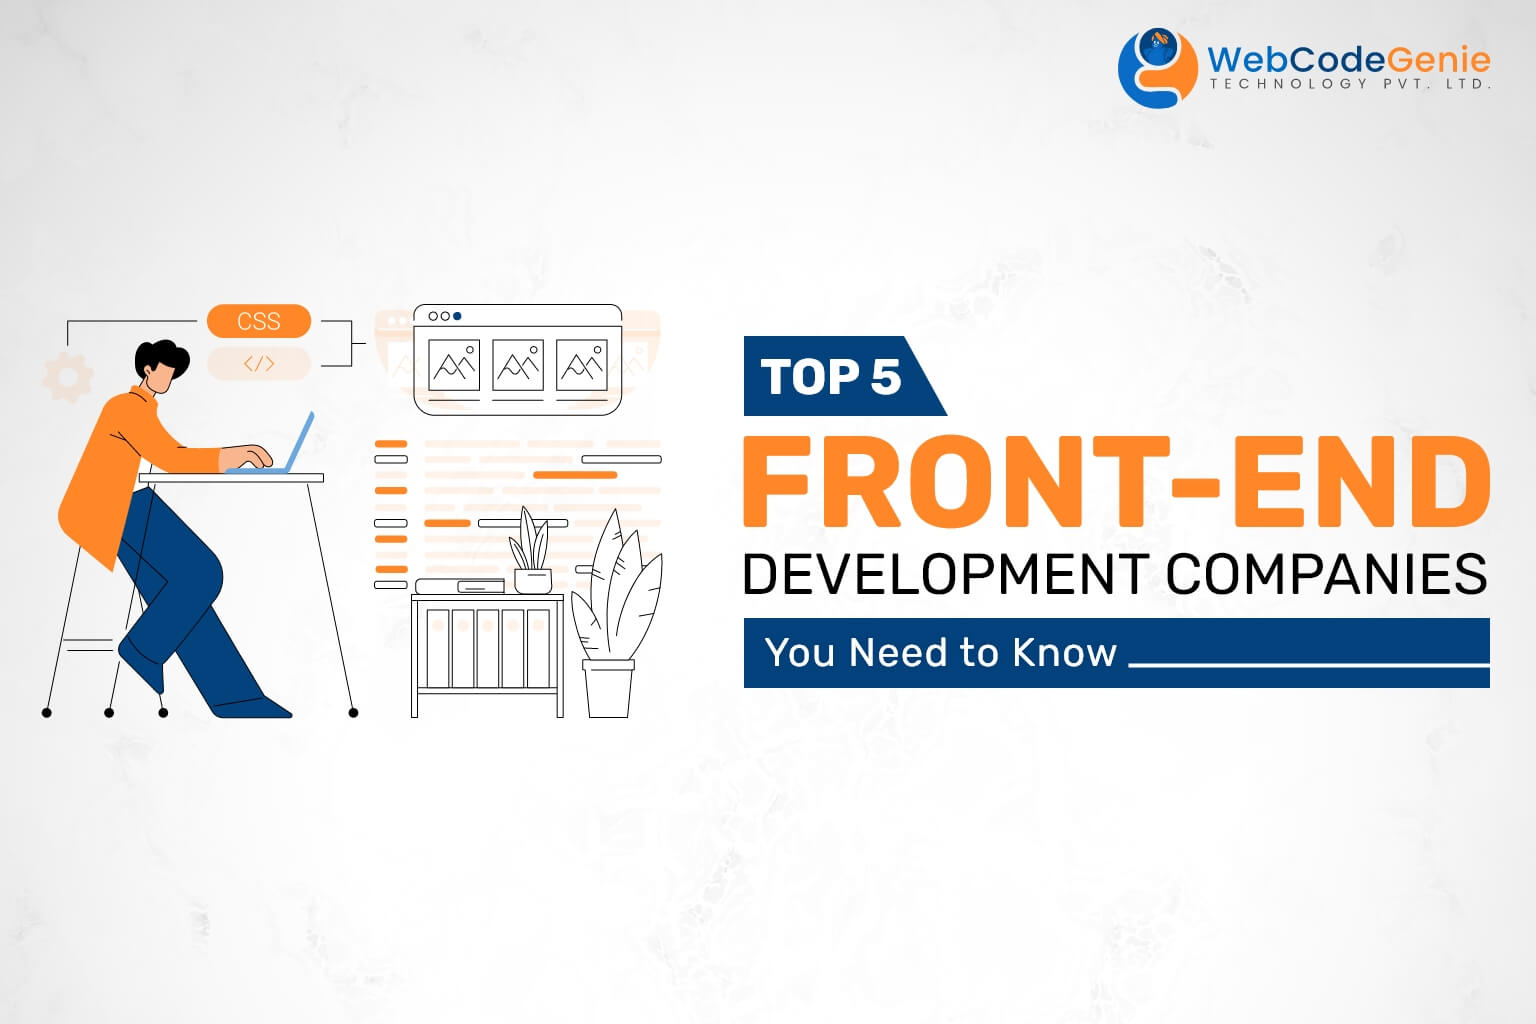 Top 5 Front-End Development Companies You Need to Know